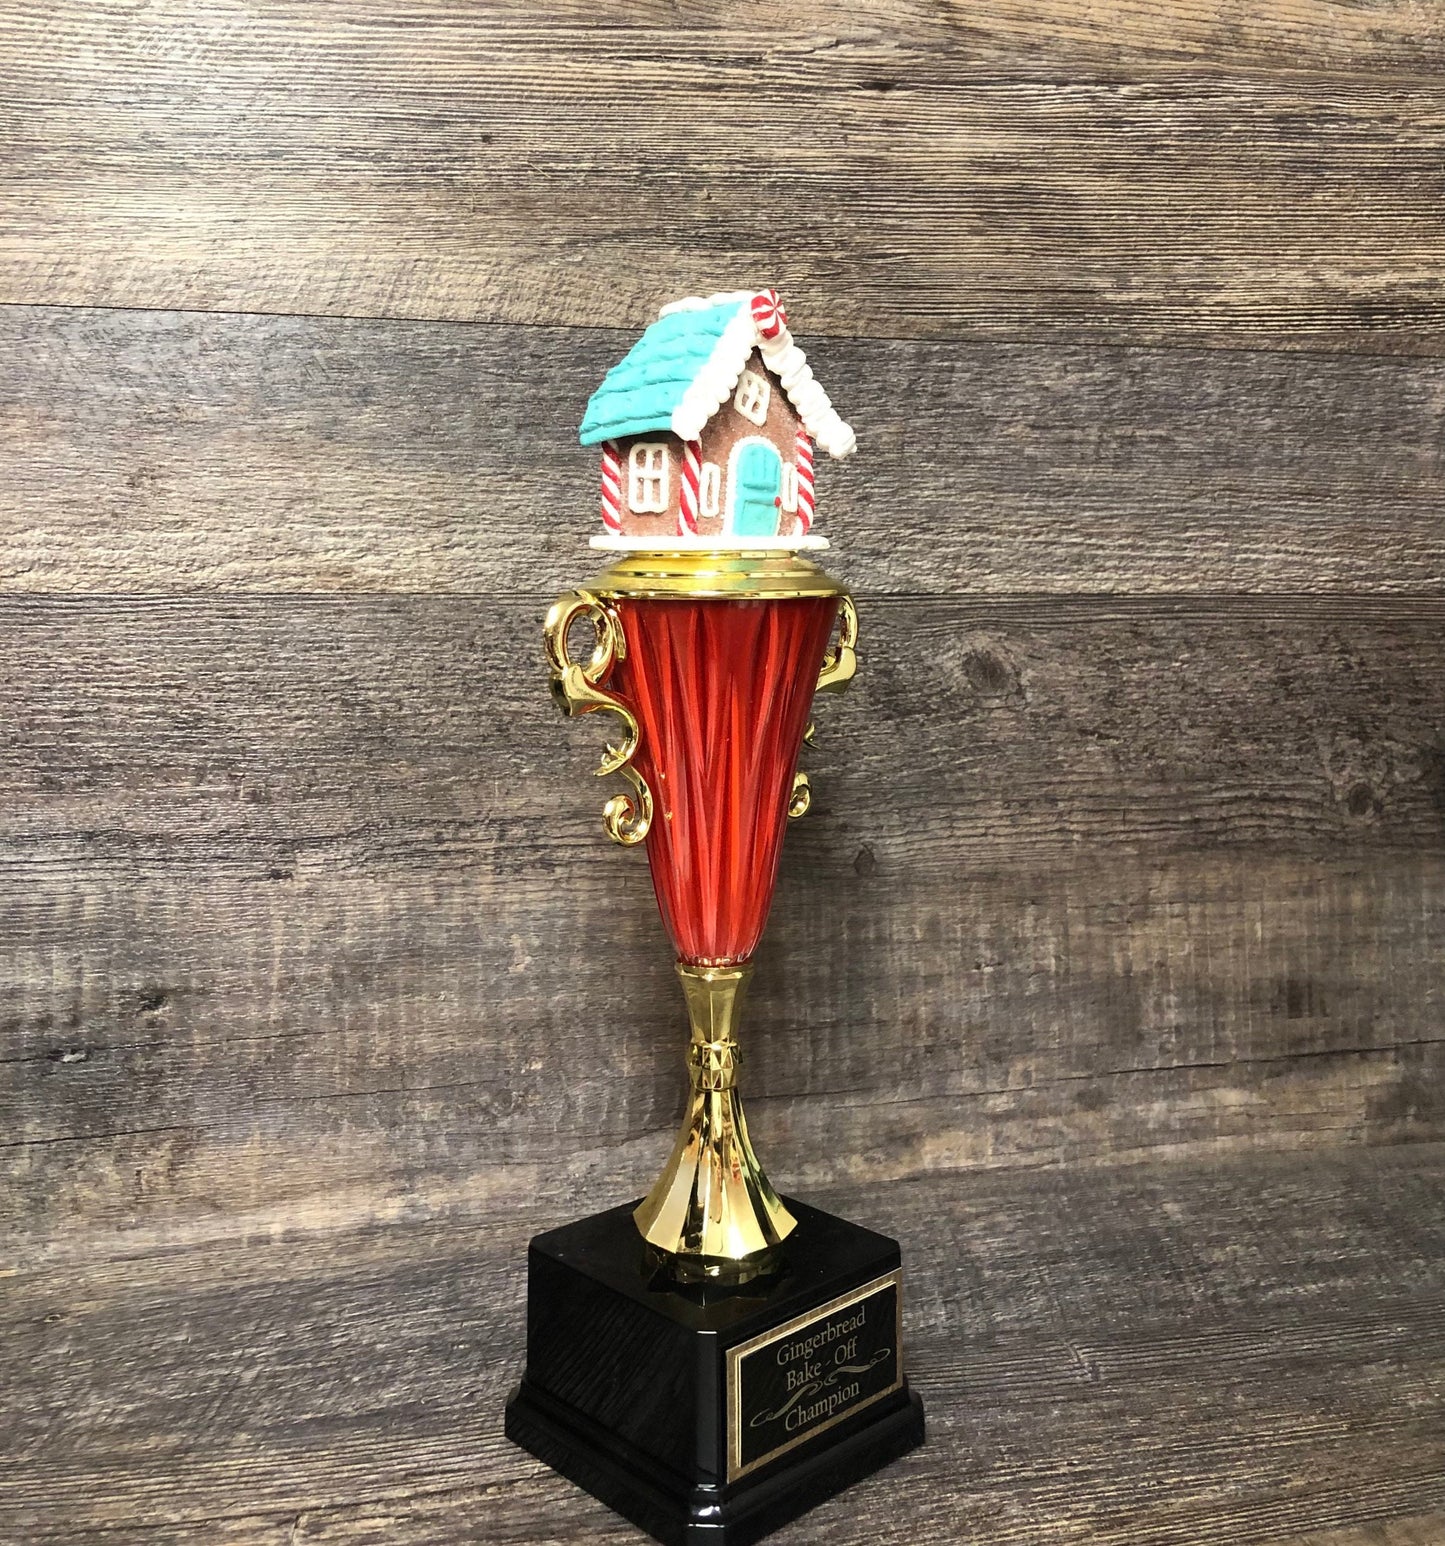 Gingerbread Decorating Trophy Cookie Bake Off Ugliest Ugly Sweater Contest Family Christmas Trophy Winner Christmas Decor Holiday Decor